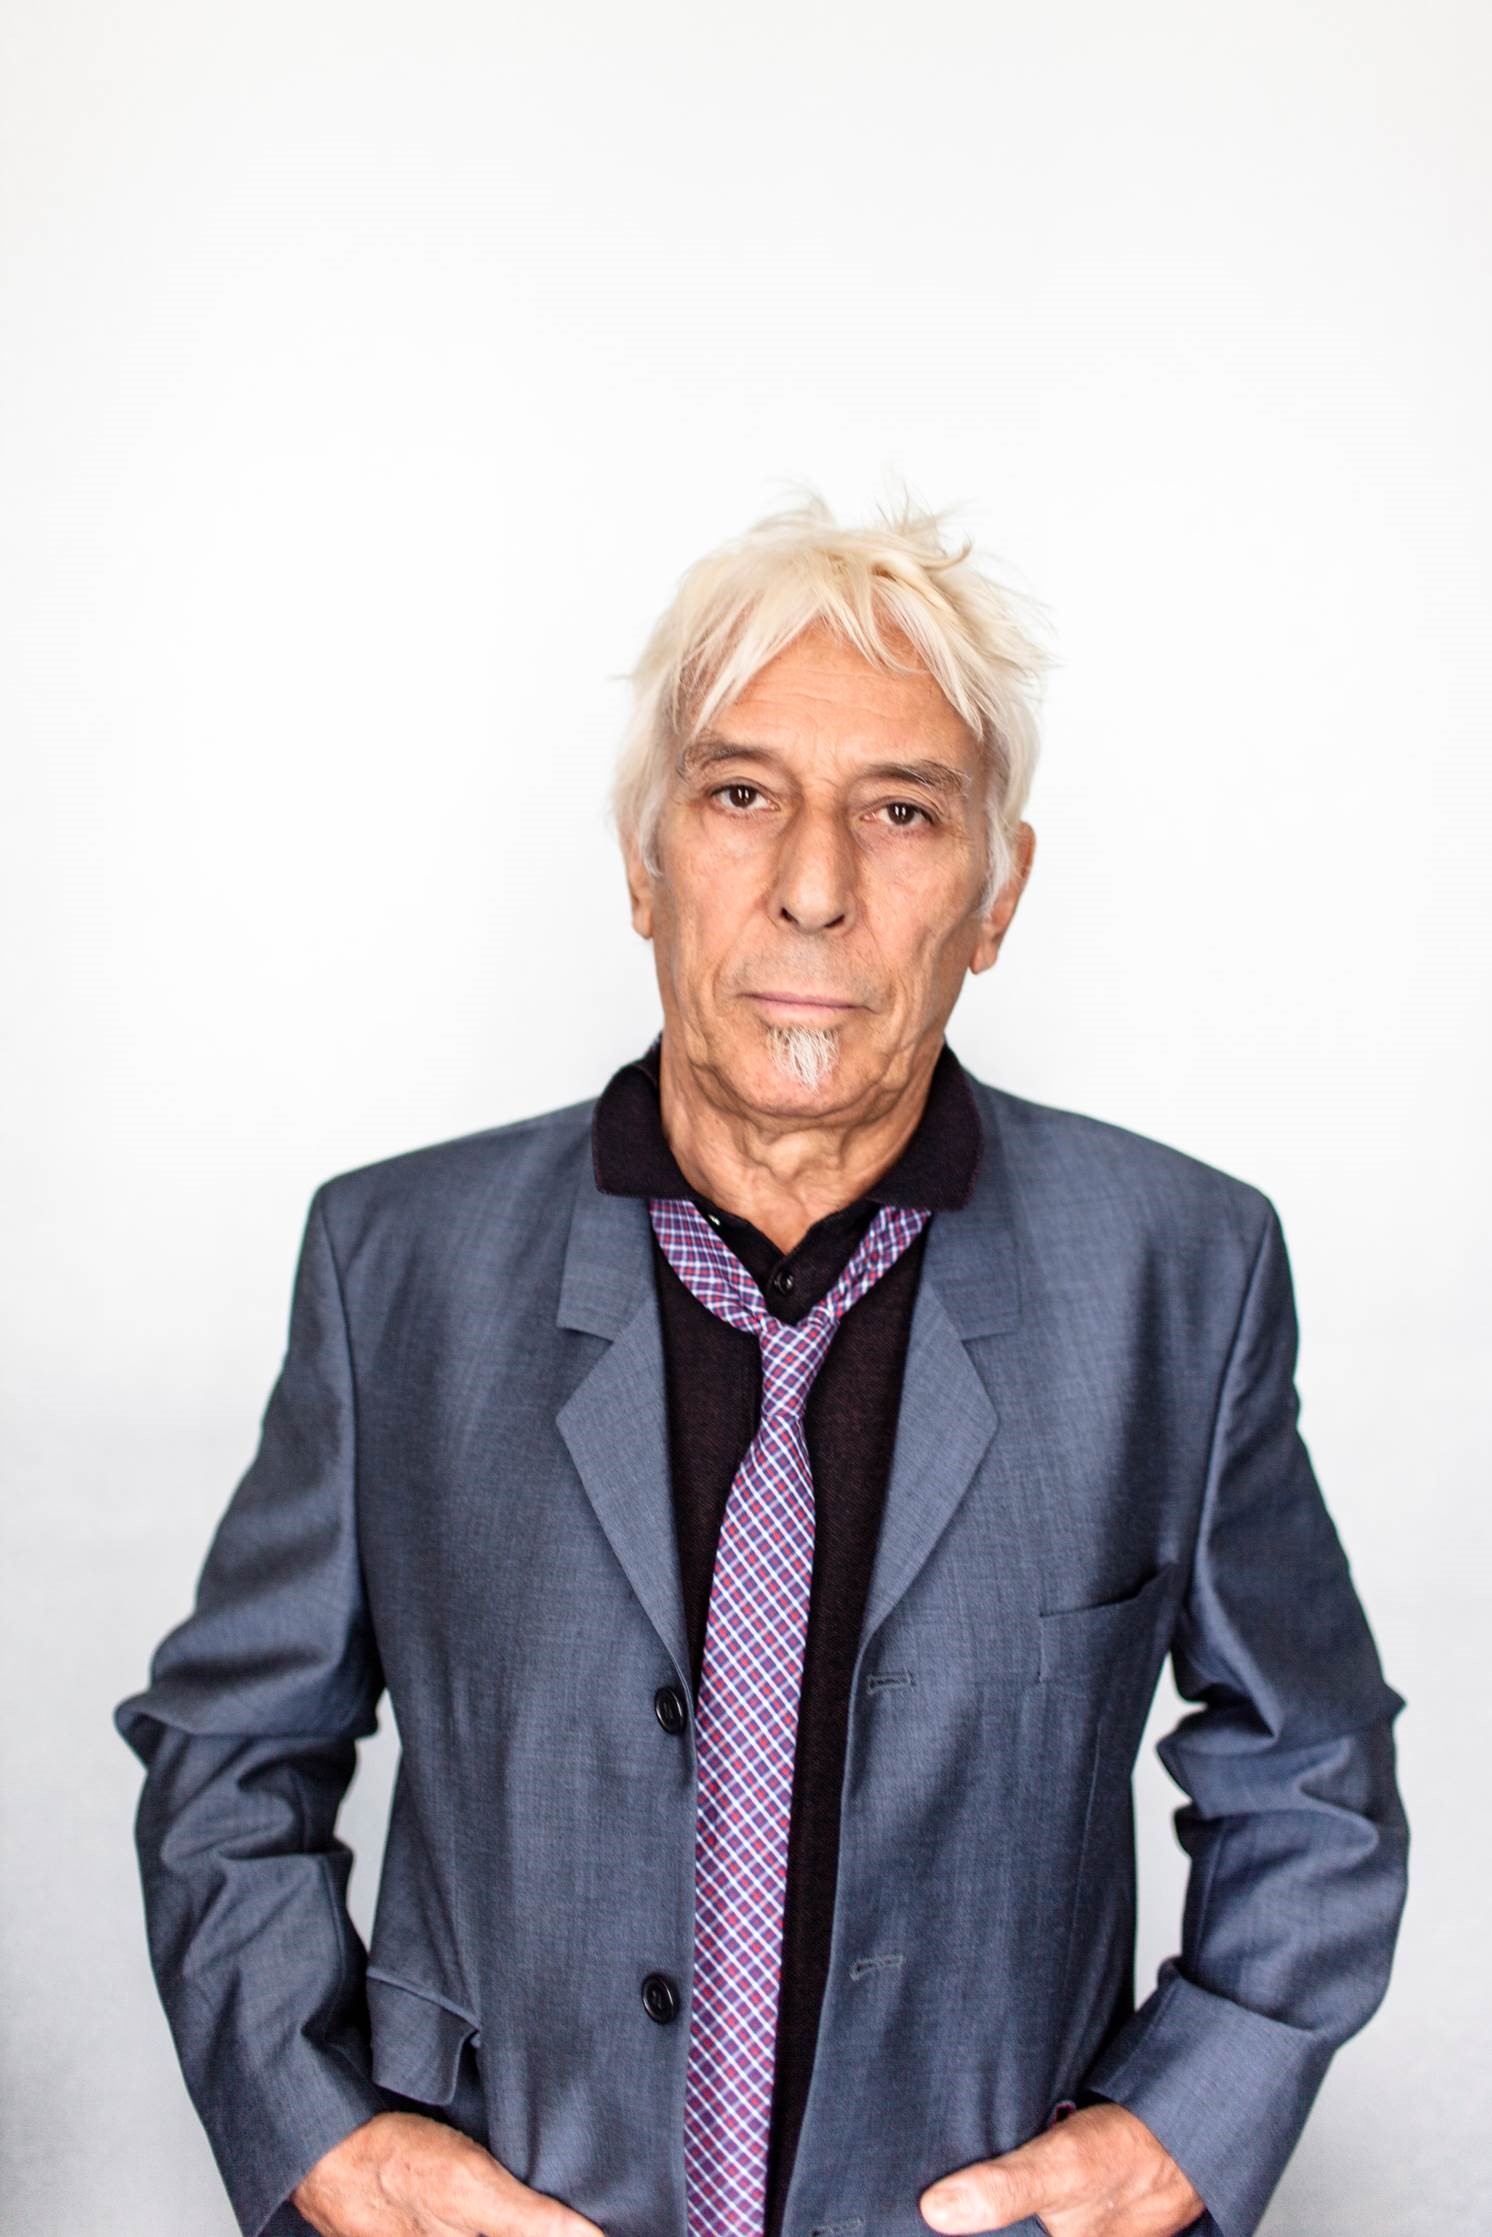 Ghent Jazz Festival unveils new names including John Cale